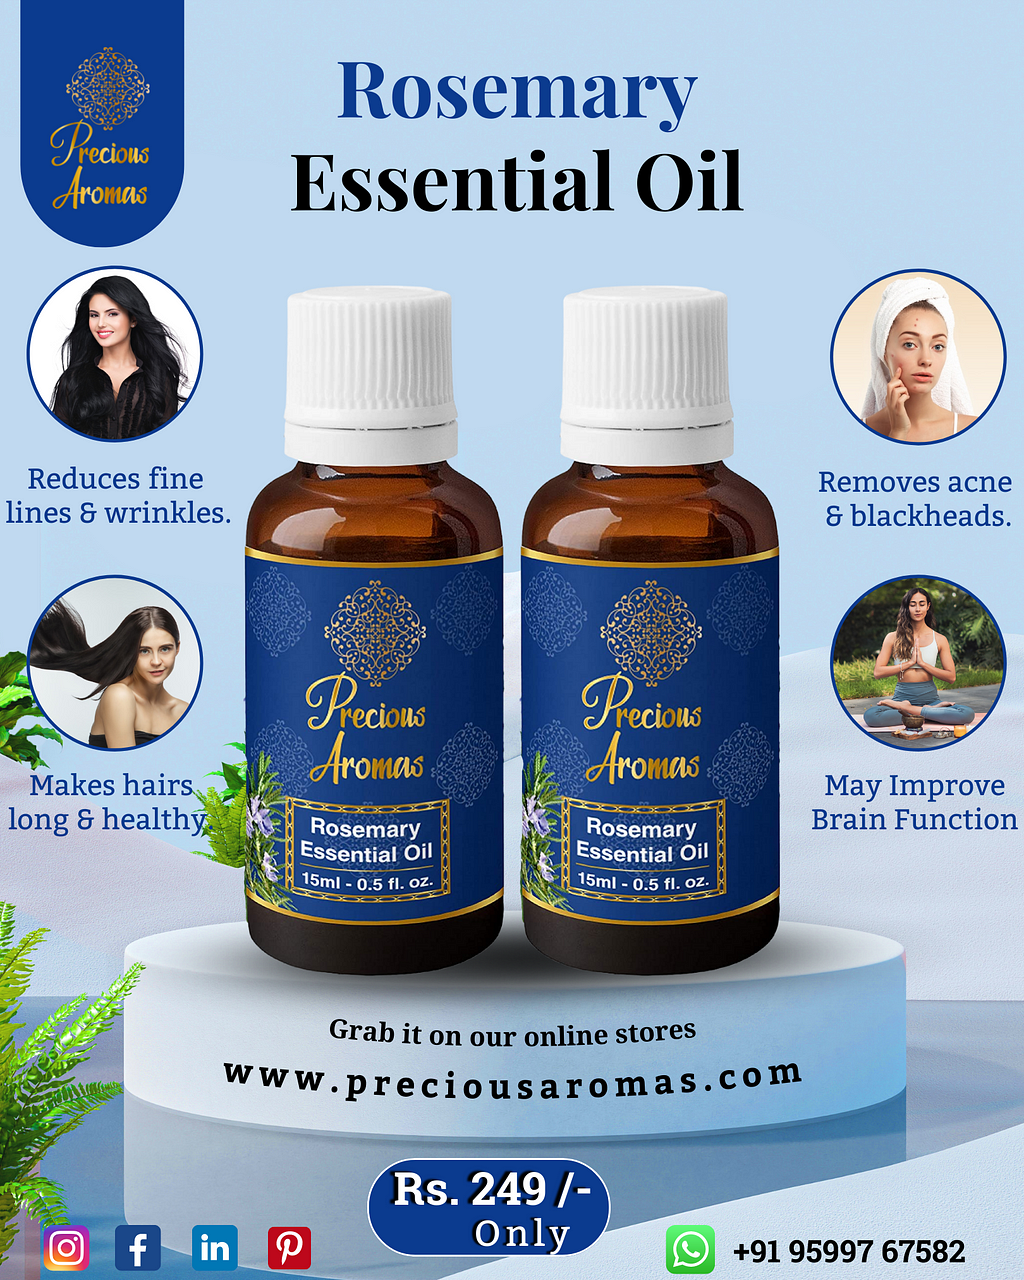 Our Rosemary Essential Oil is fresh and stimulating. It is considered the best oil for hair and scalp. Our product is 100% natural and organic.
 Our products have many kinds of benefits:
 🍂 This amazing oil reduces hair fall.
 🍂 It will boost your hair growth with regular use.
 🍂 Rich in antioxidants to enhance skincare.
 🍂 This oil improves the scalp.